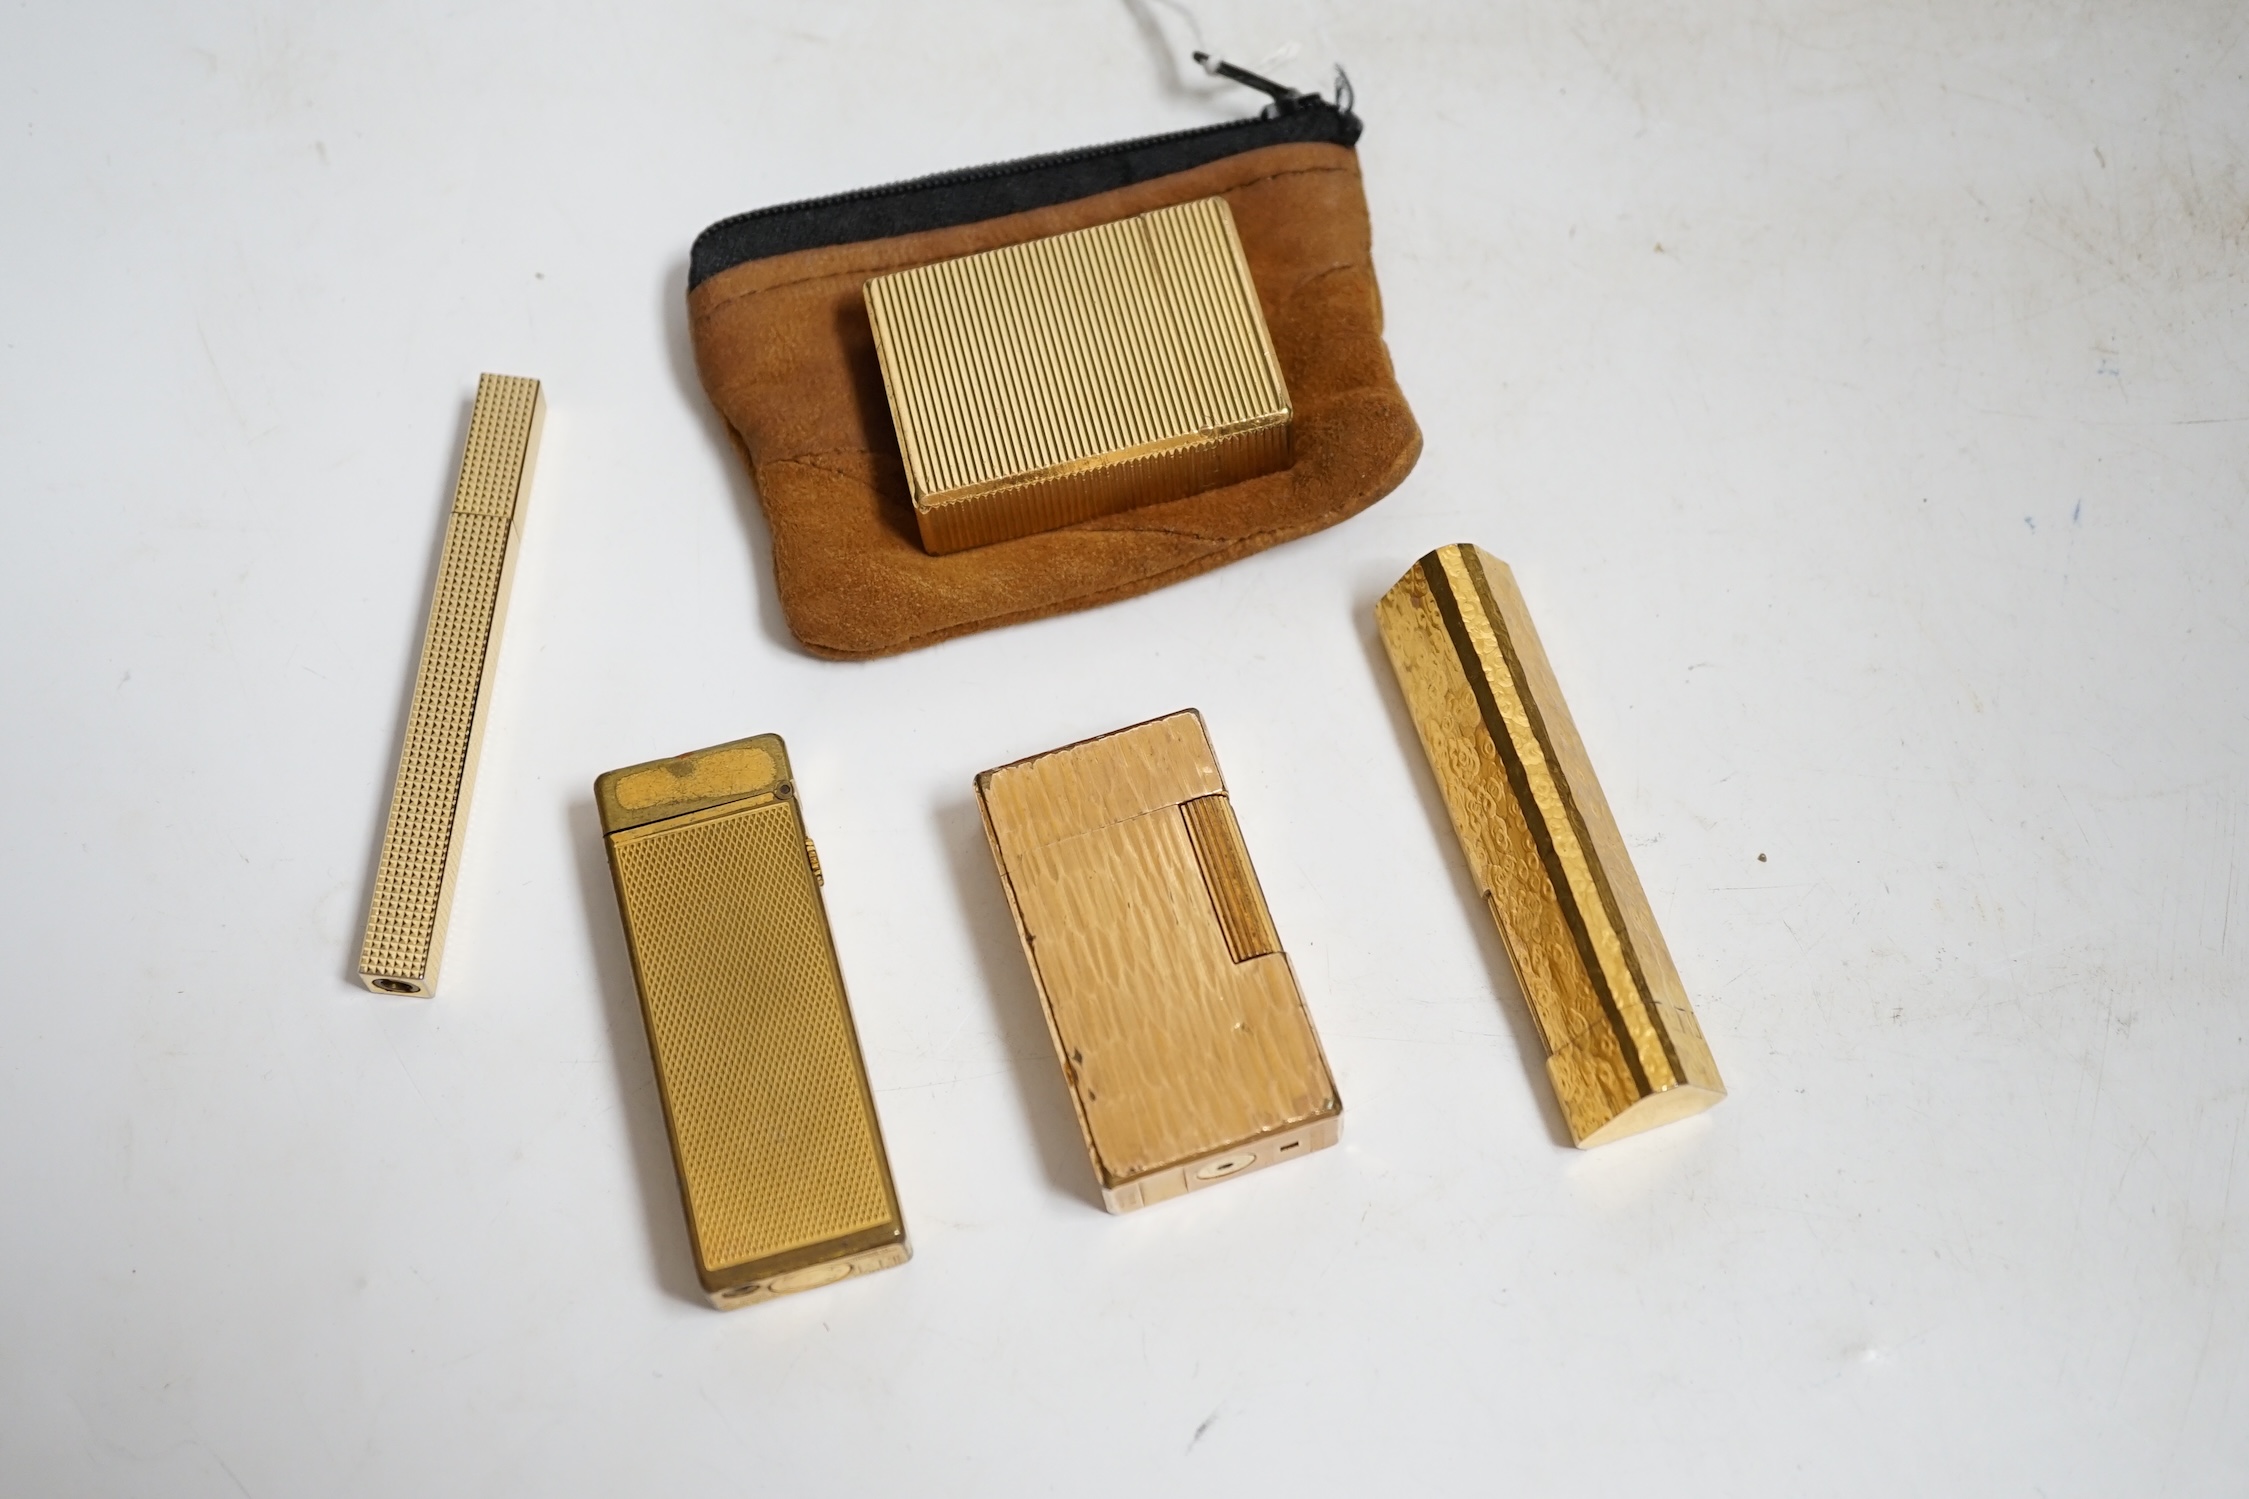 Two Dunhill gold plated lighters a Dupont lighter and two others. Condition - fair, not working.